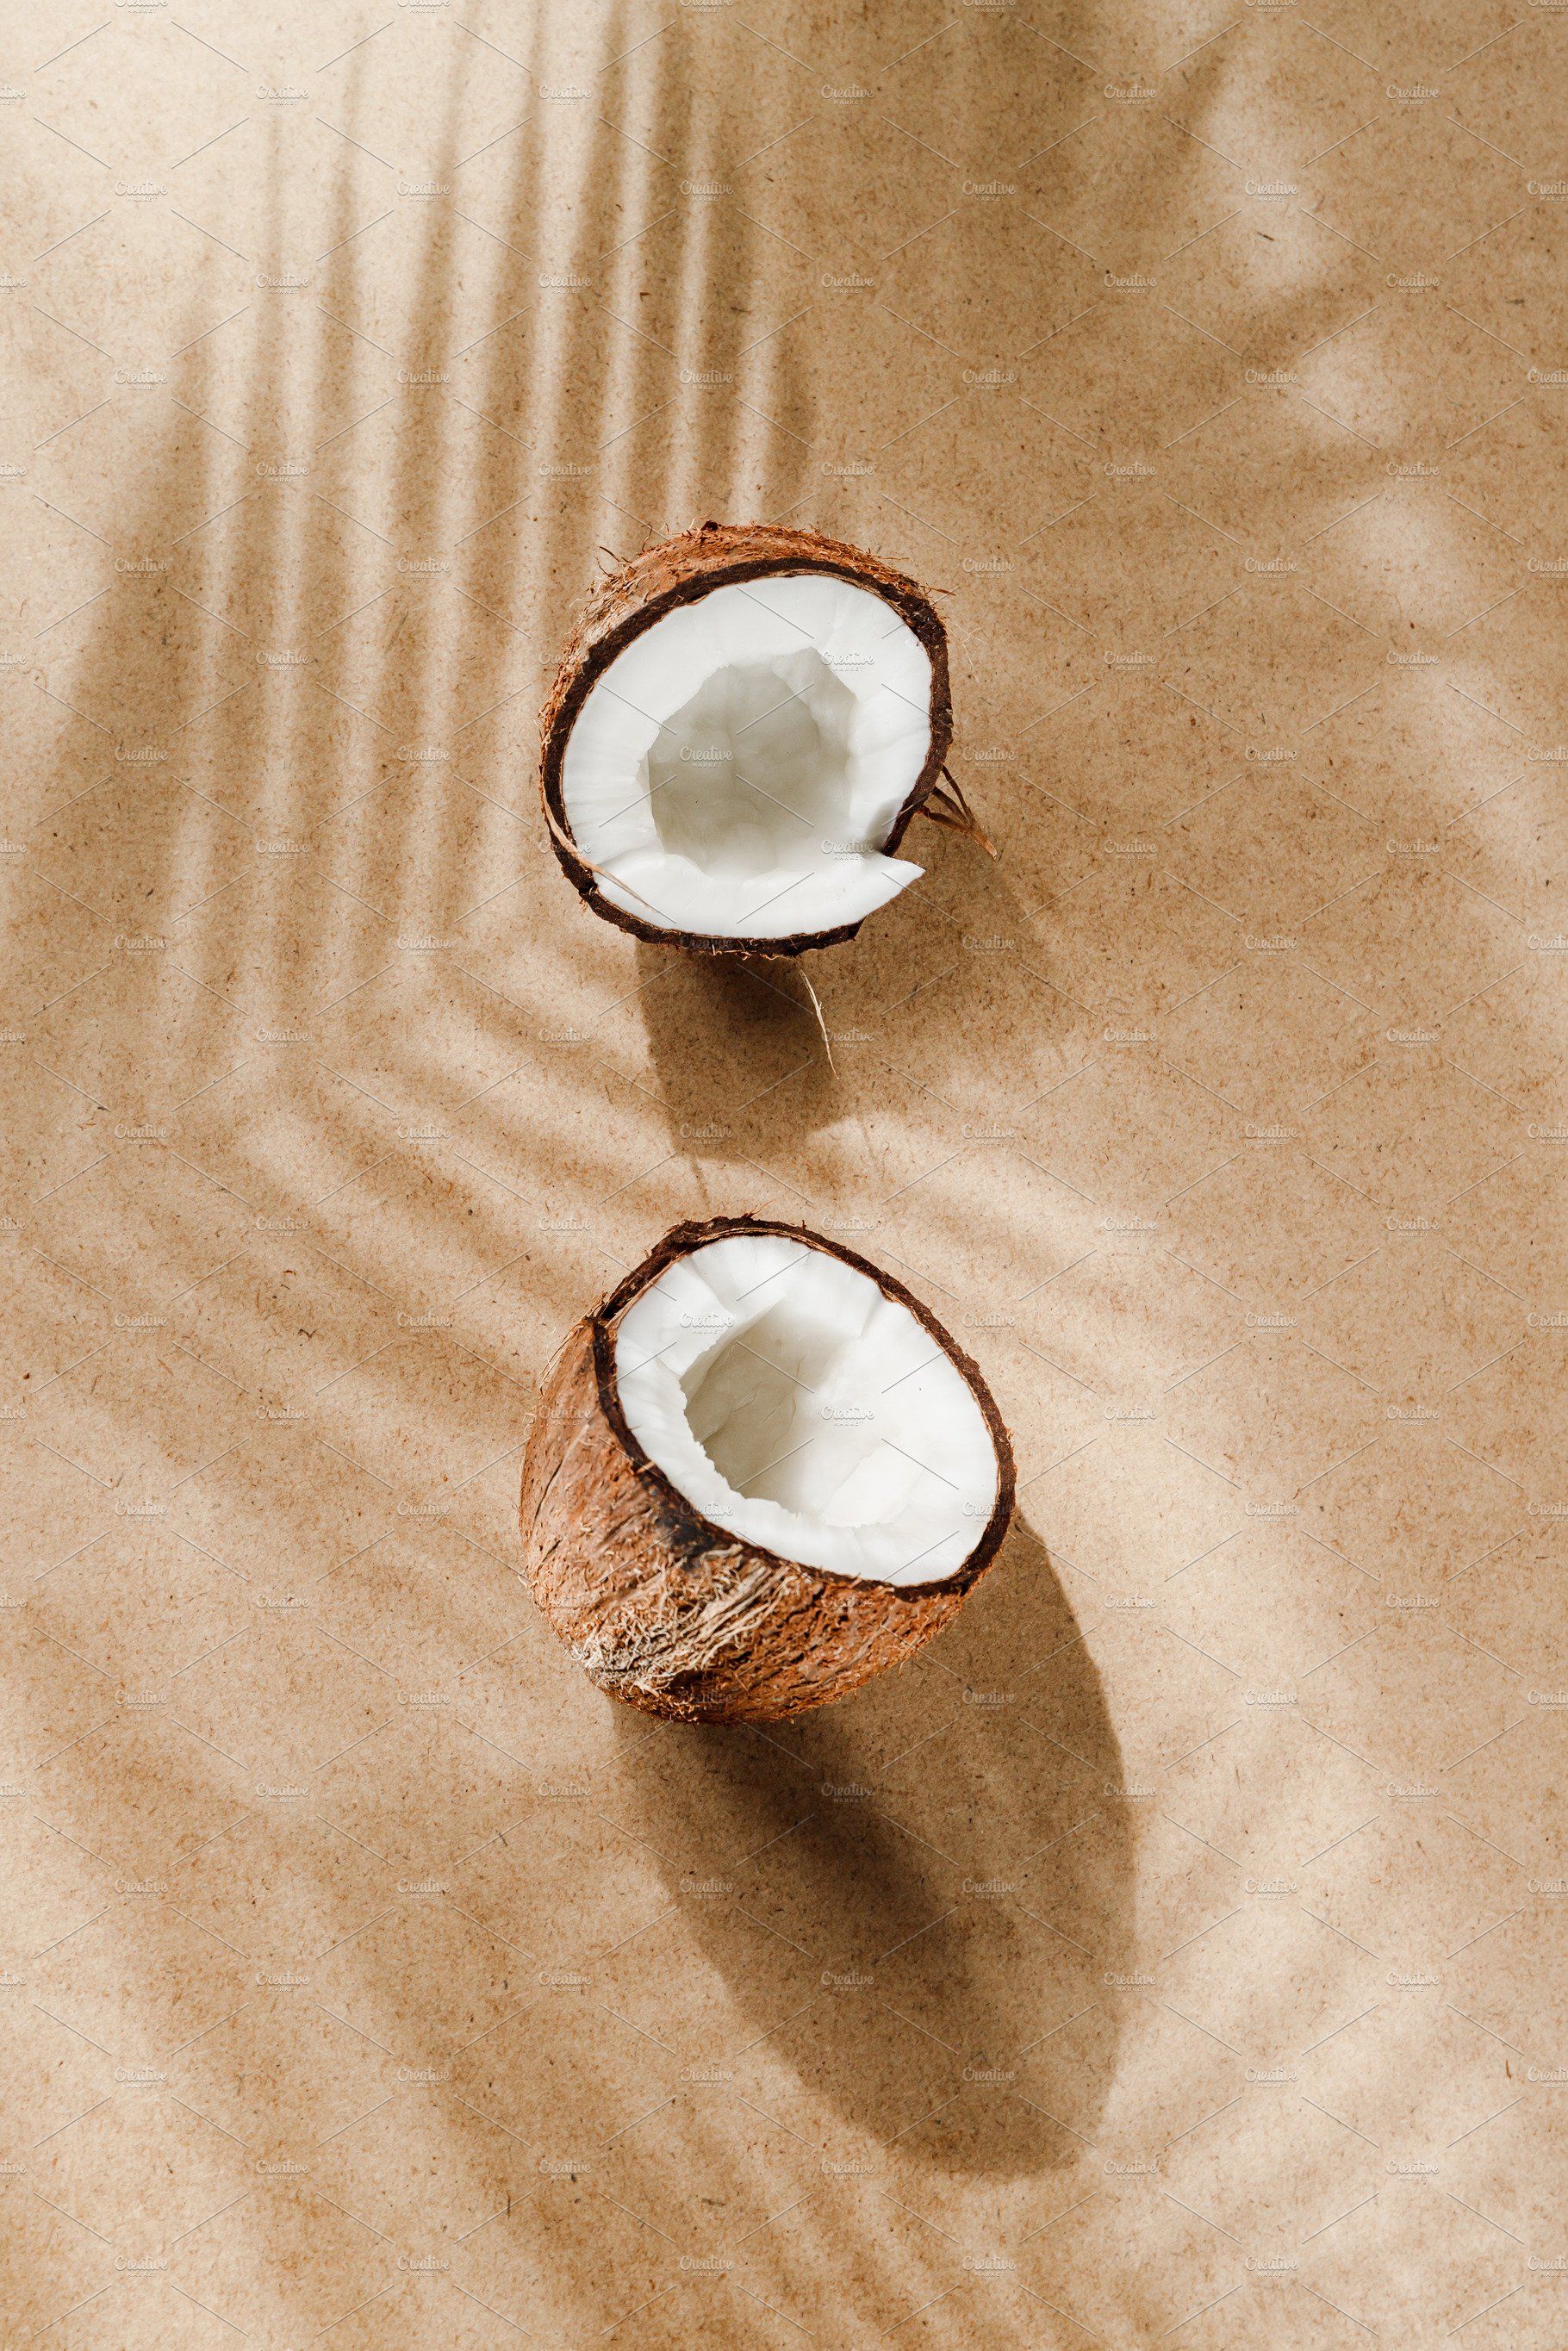 Coconut featuring coconut, abstract, and tropic. Mood board inspiration, Nature inspiration, Brown aesthetic